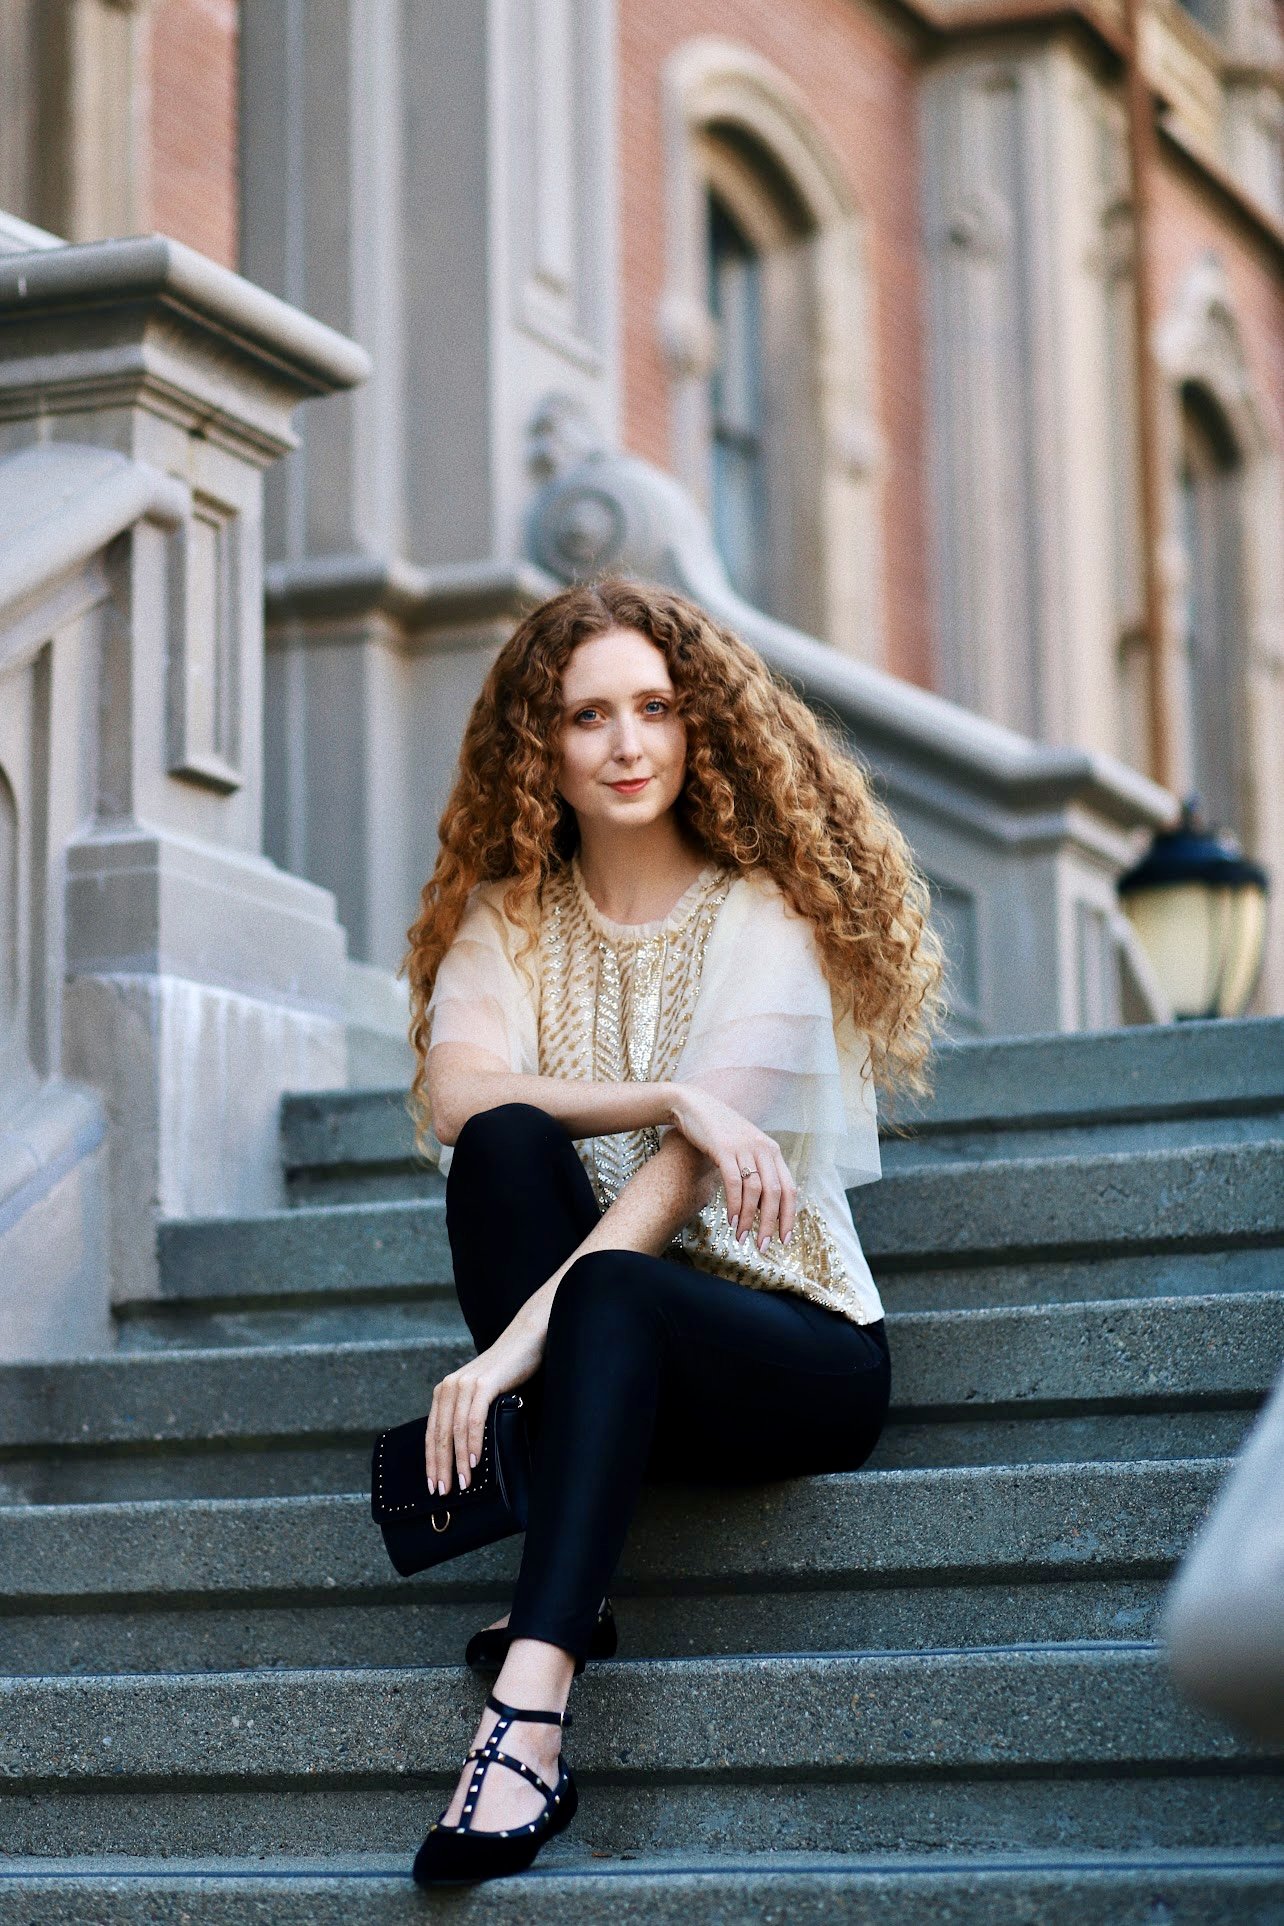 How to treat frizzy curly hair - all the tips to easily tame frizz and care  for your hair — Lorna Ryan - A San Francisco Lifestyle Blog sharing top  finds